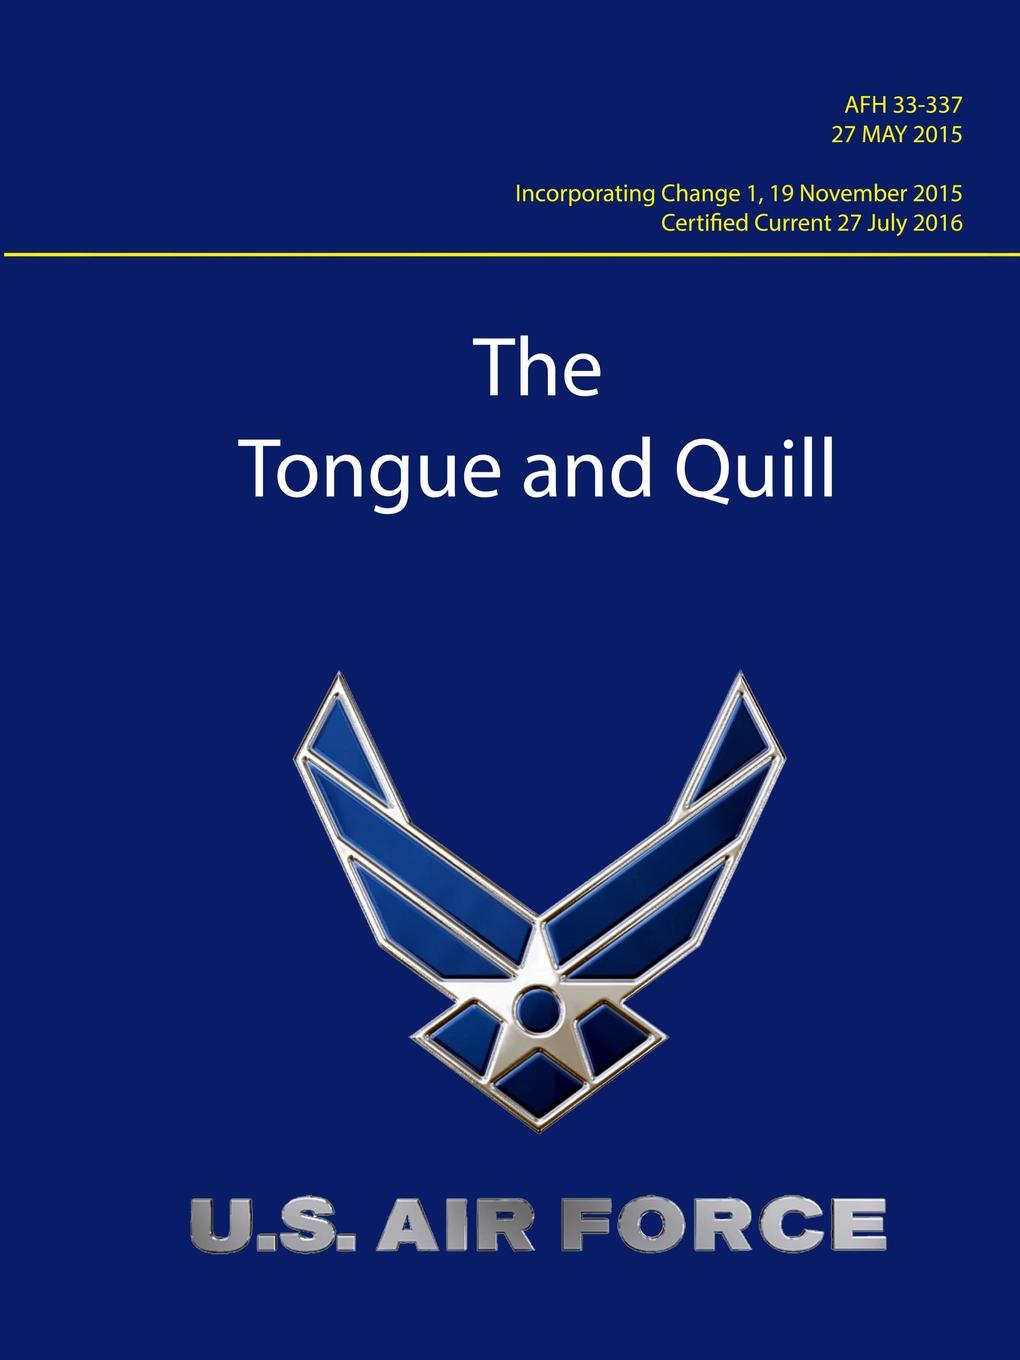 U.S. Air Force Tongue and Quill - AFH 33-337 (Certified Current 27 July 2016)